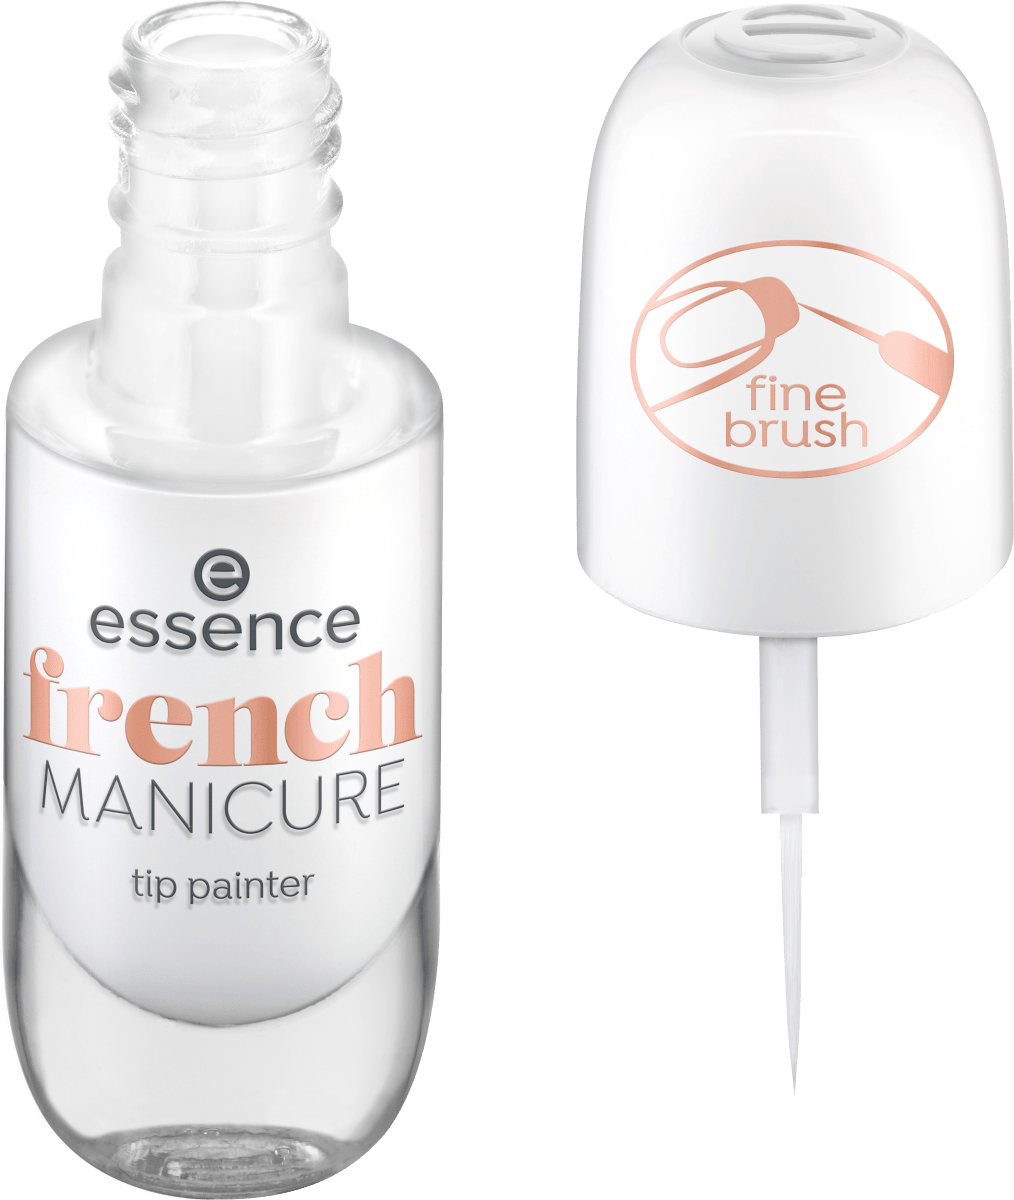 Nagellack French Manicure Tip Painter 01 You’re So Fine 8 мл essence